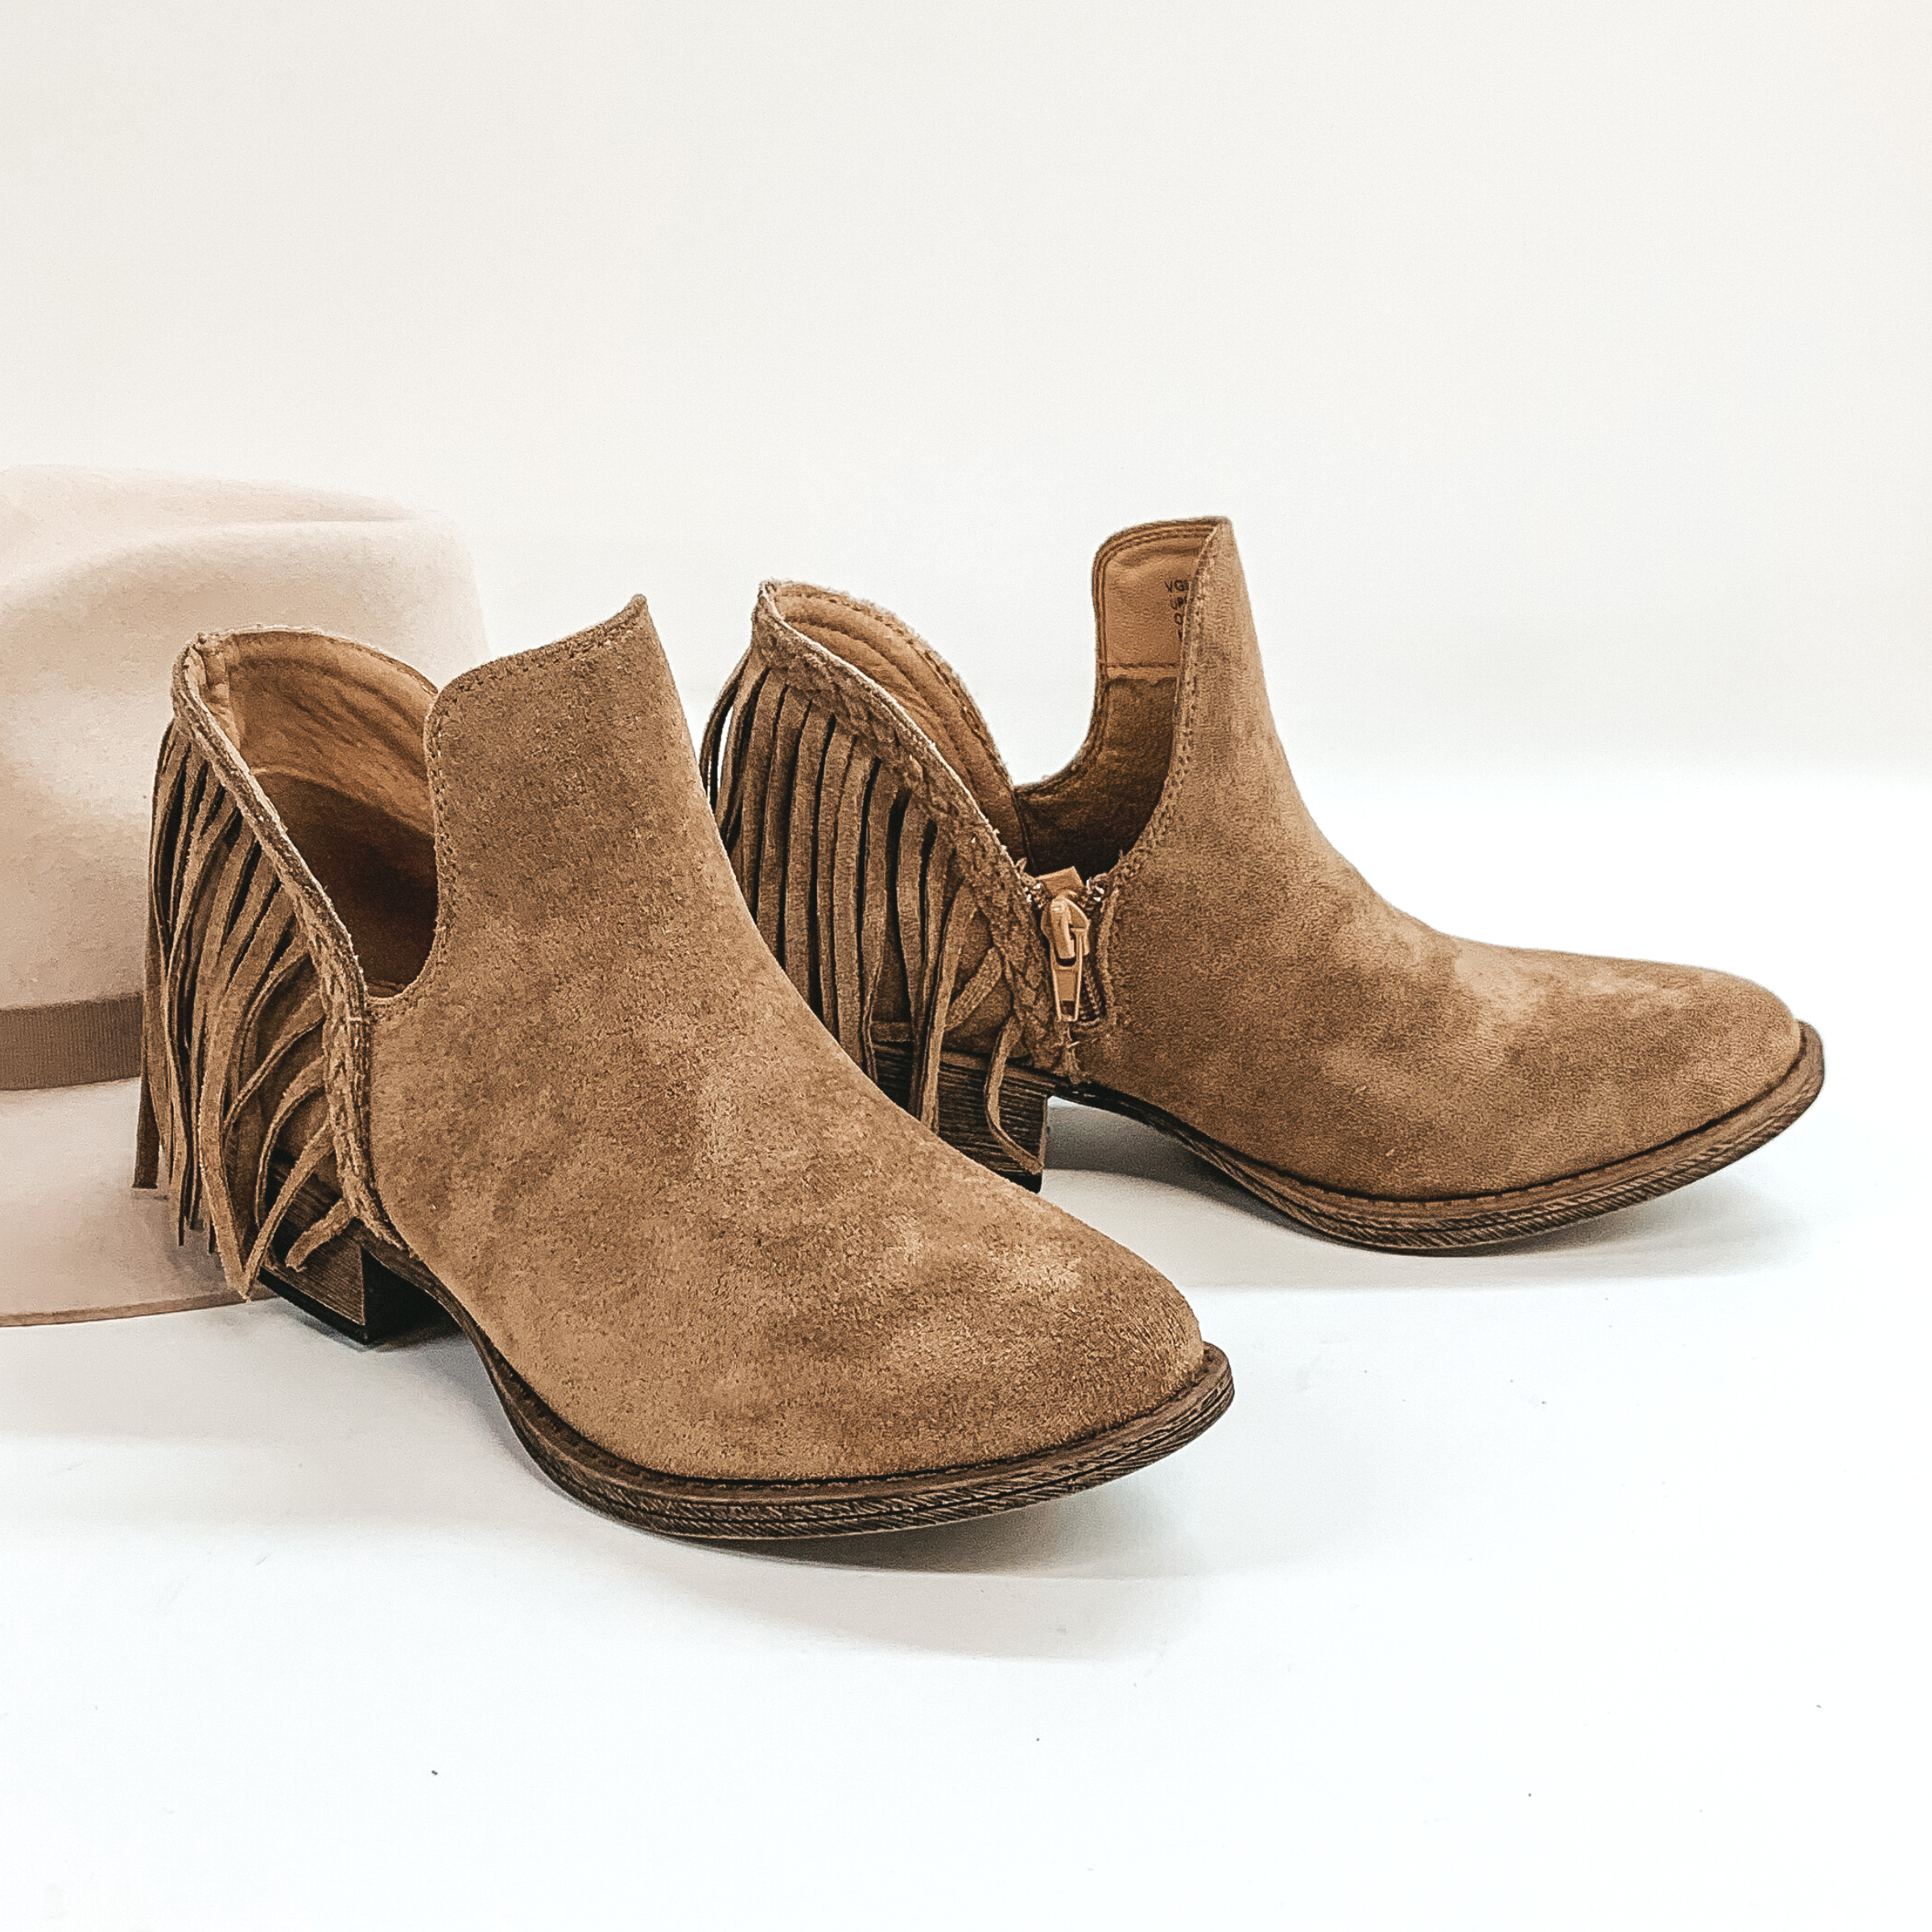 Very G | Be Yourself Heeled Fringe Booties with Cutouts in Taupe